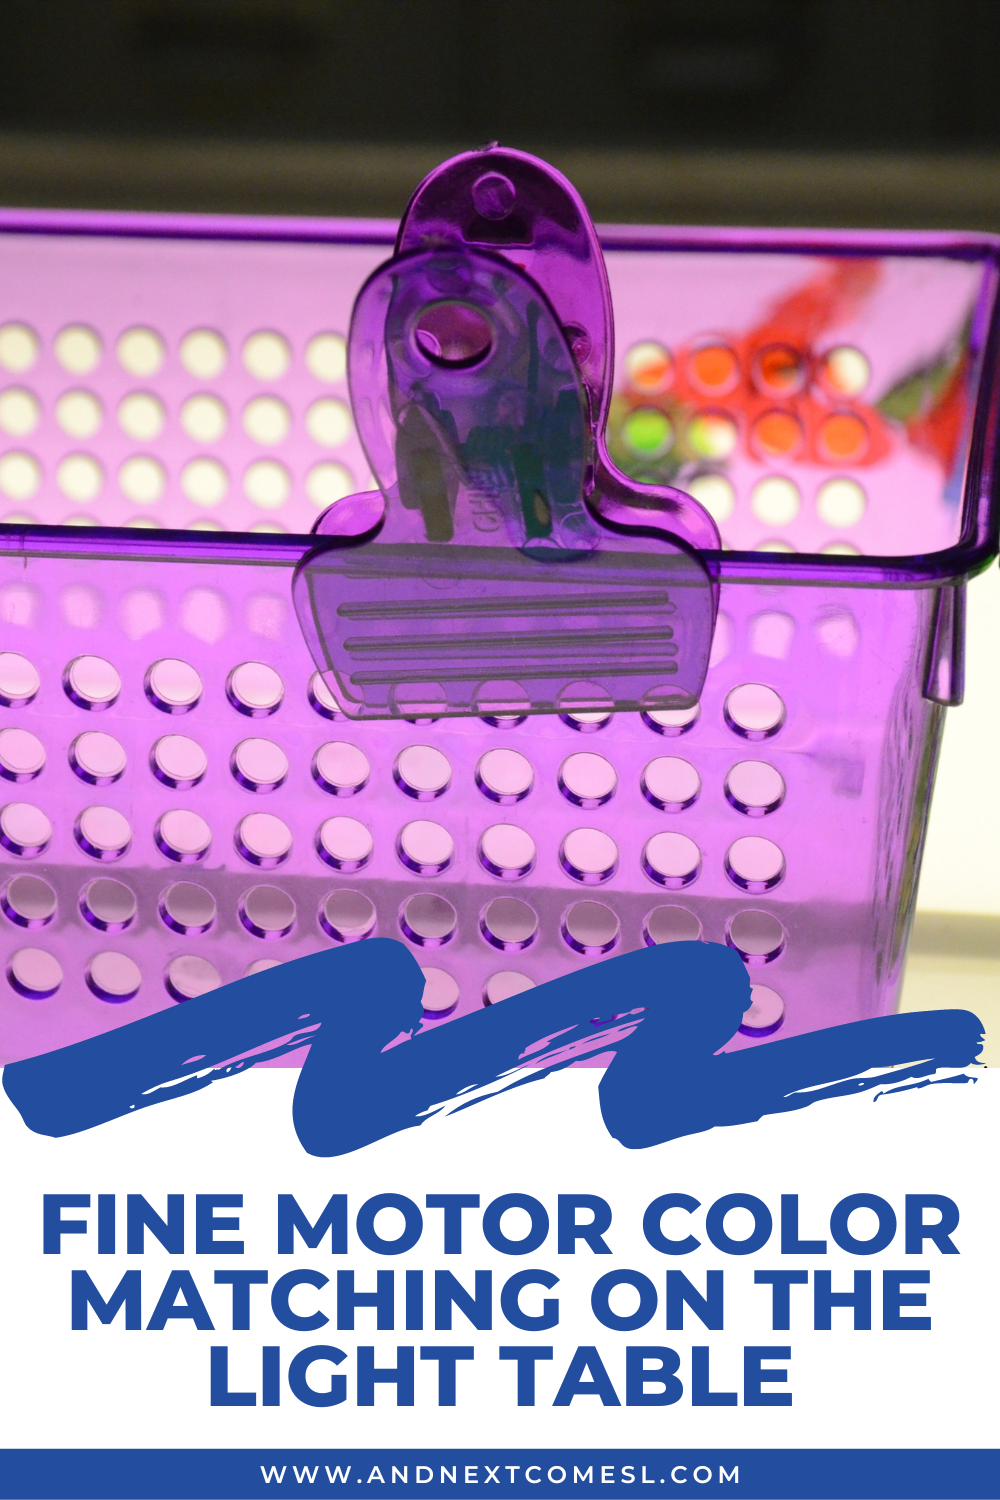 Fine motor color matching light table activity for kids